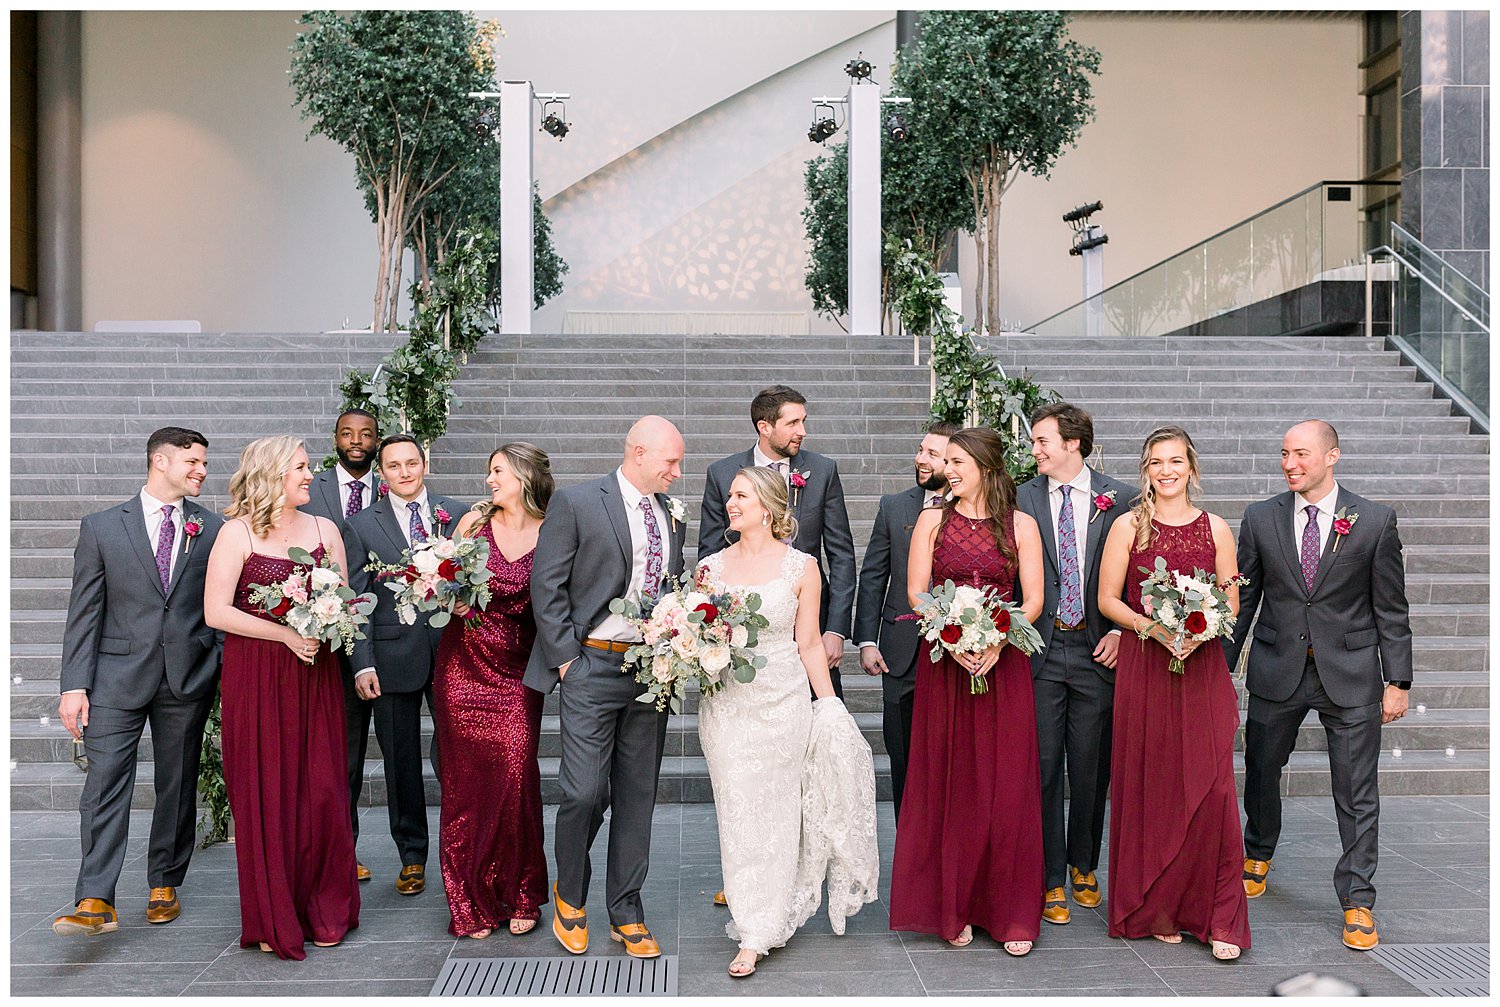 Red and gray wedding party photos for a fall wedding at the Ritz Carlton